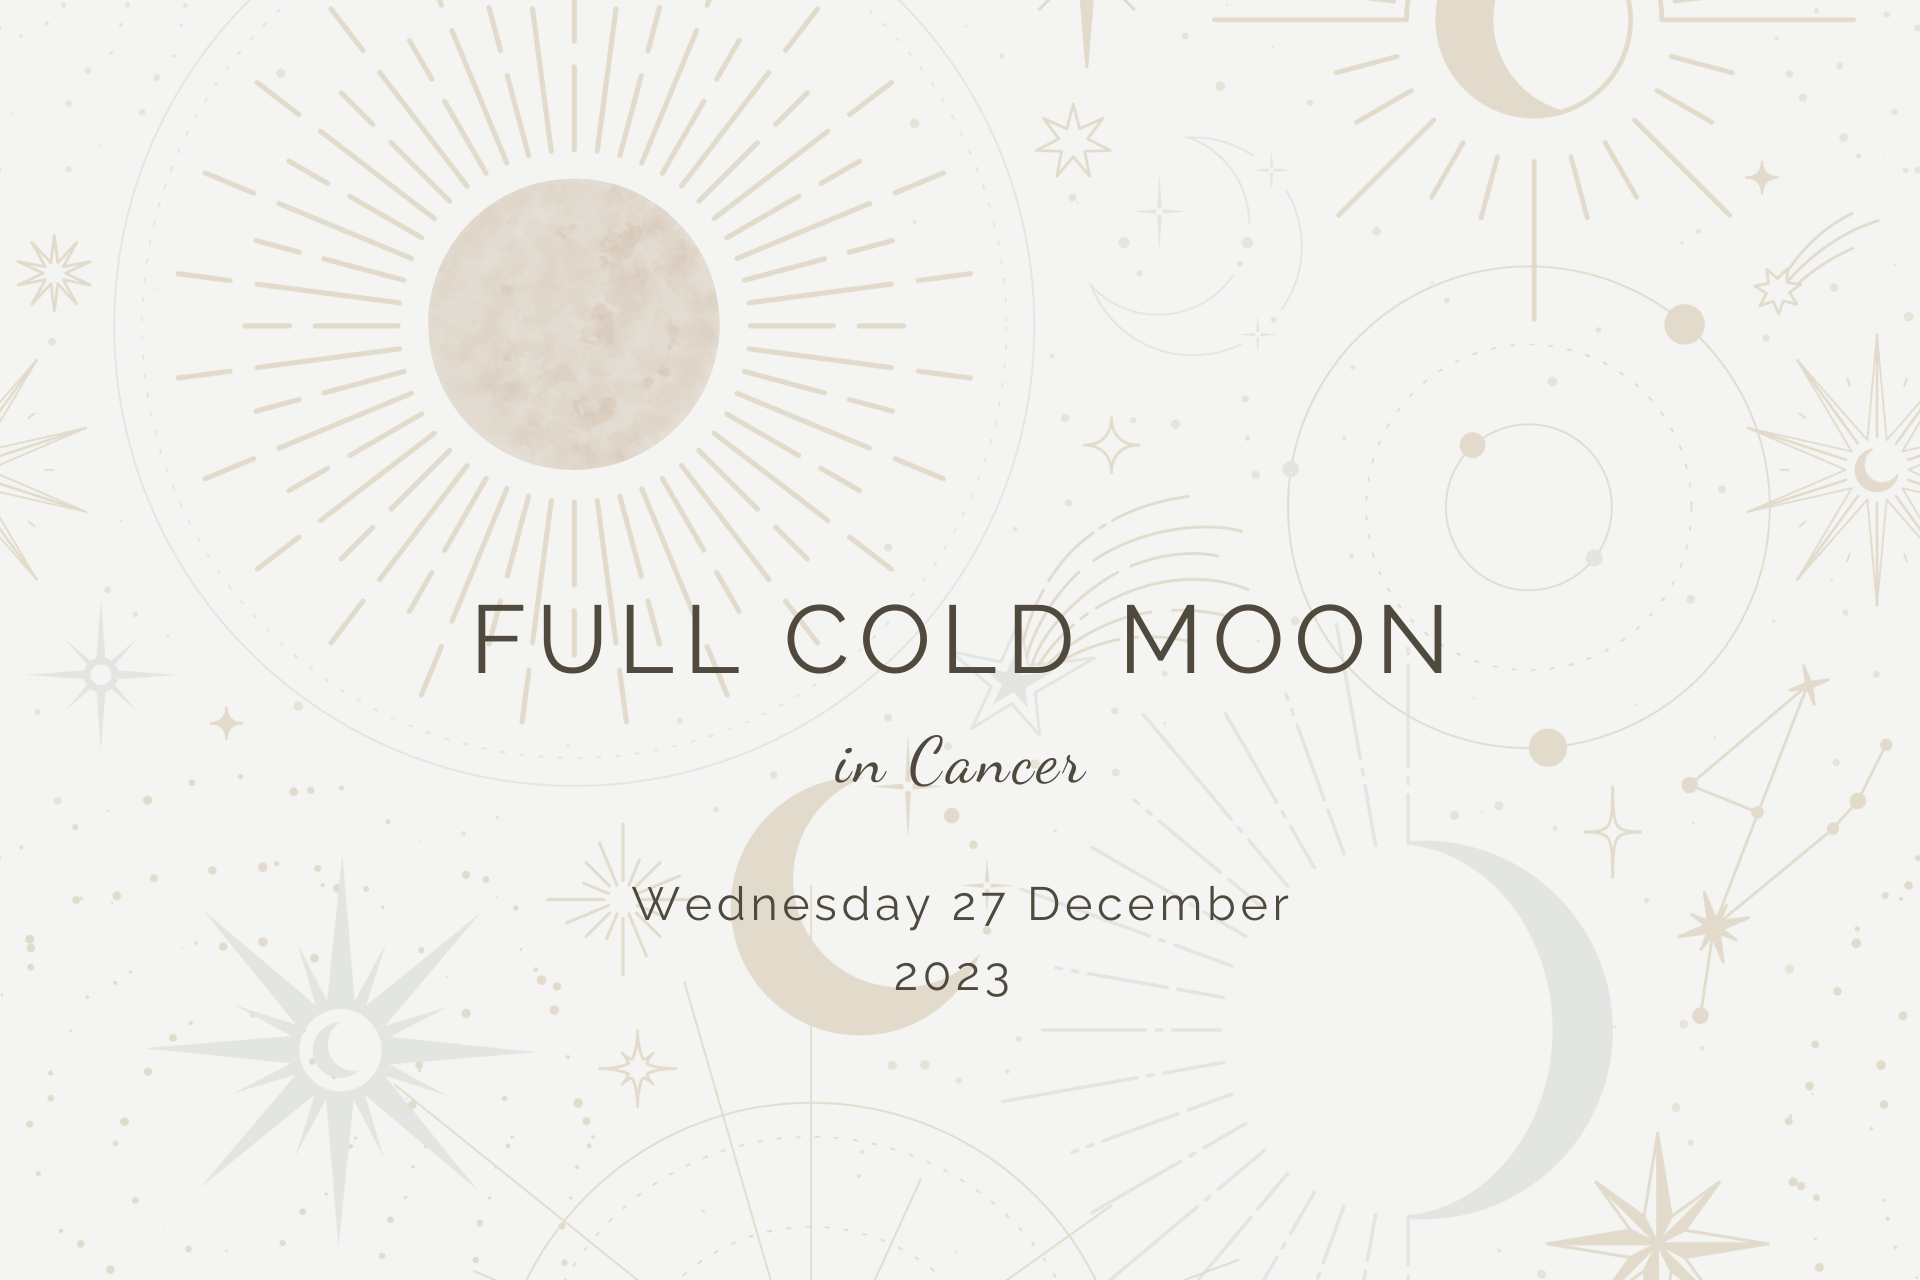 Full Cold Moon in Cancer by Sue Cartwright, Spiral Leaf